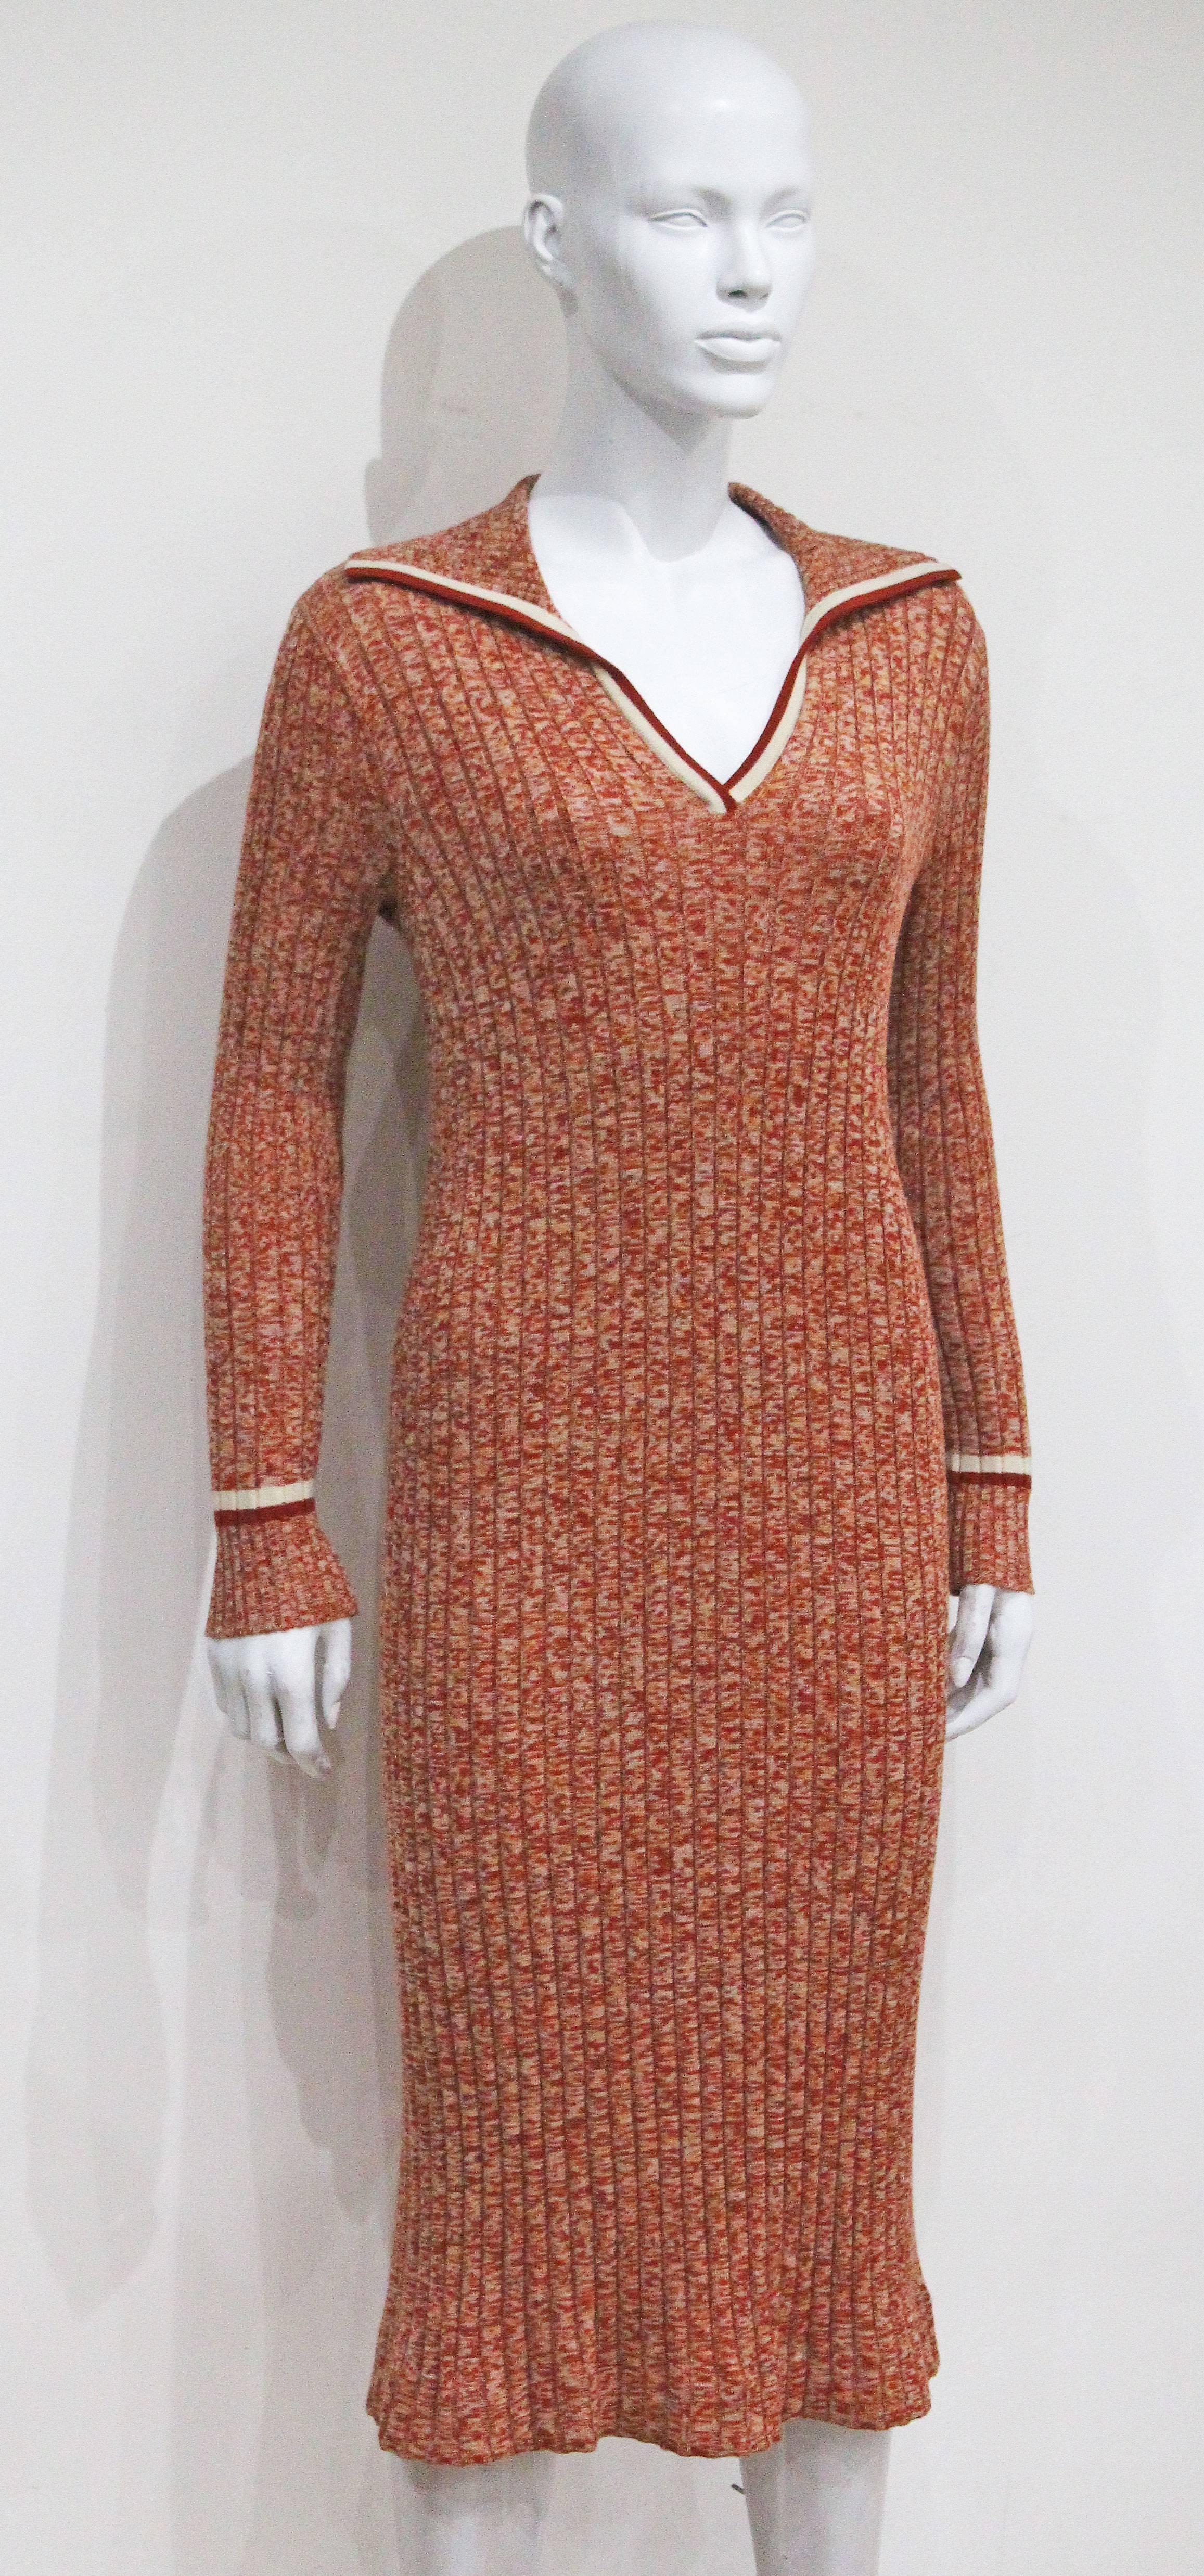 A rib knit dress by Céline from the 1970s. The dress is in a speckled orange tone rib knit wool and features a wing collar and striped bands around the cuff and collar. 

S - M